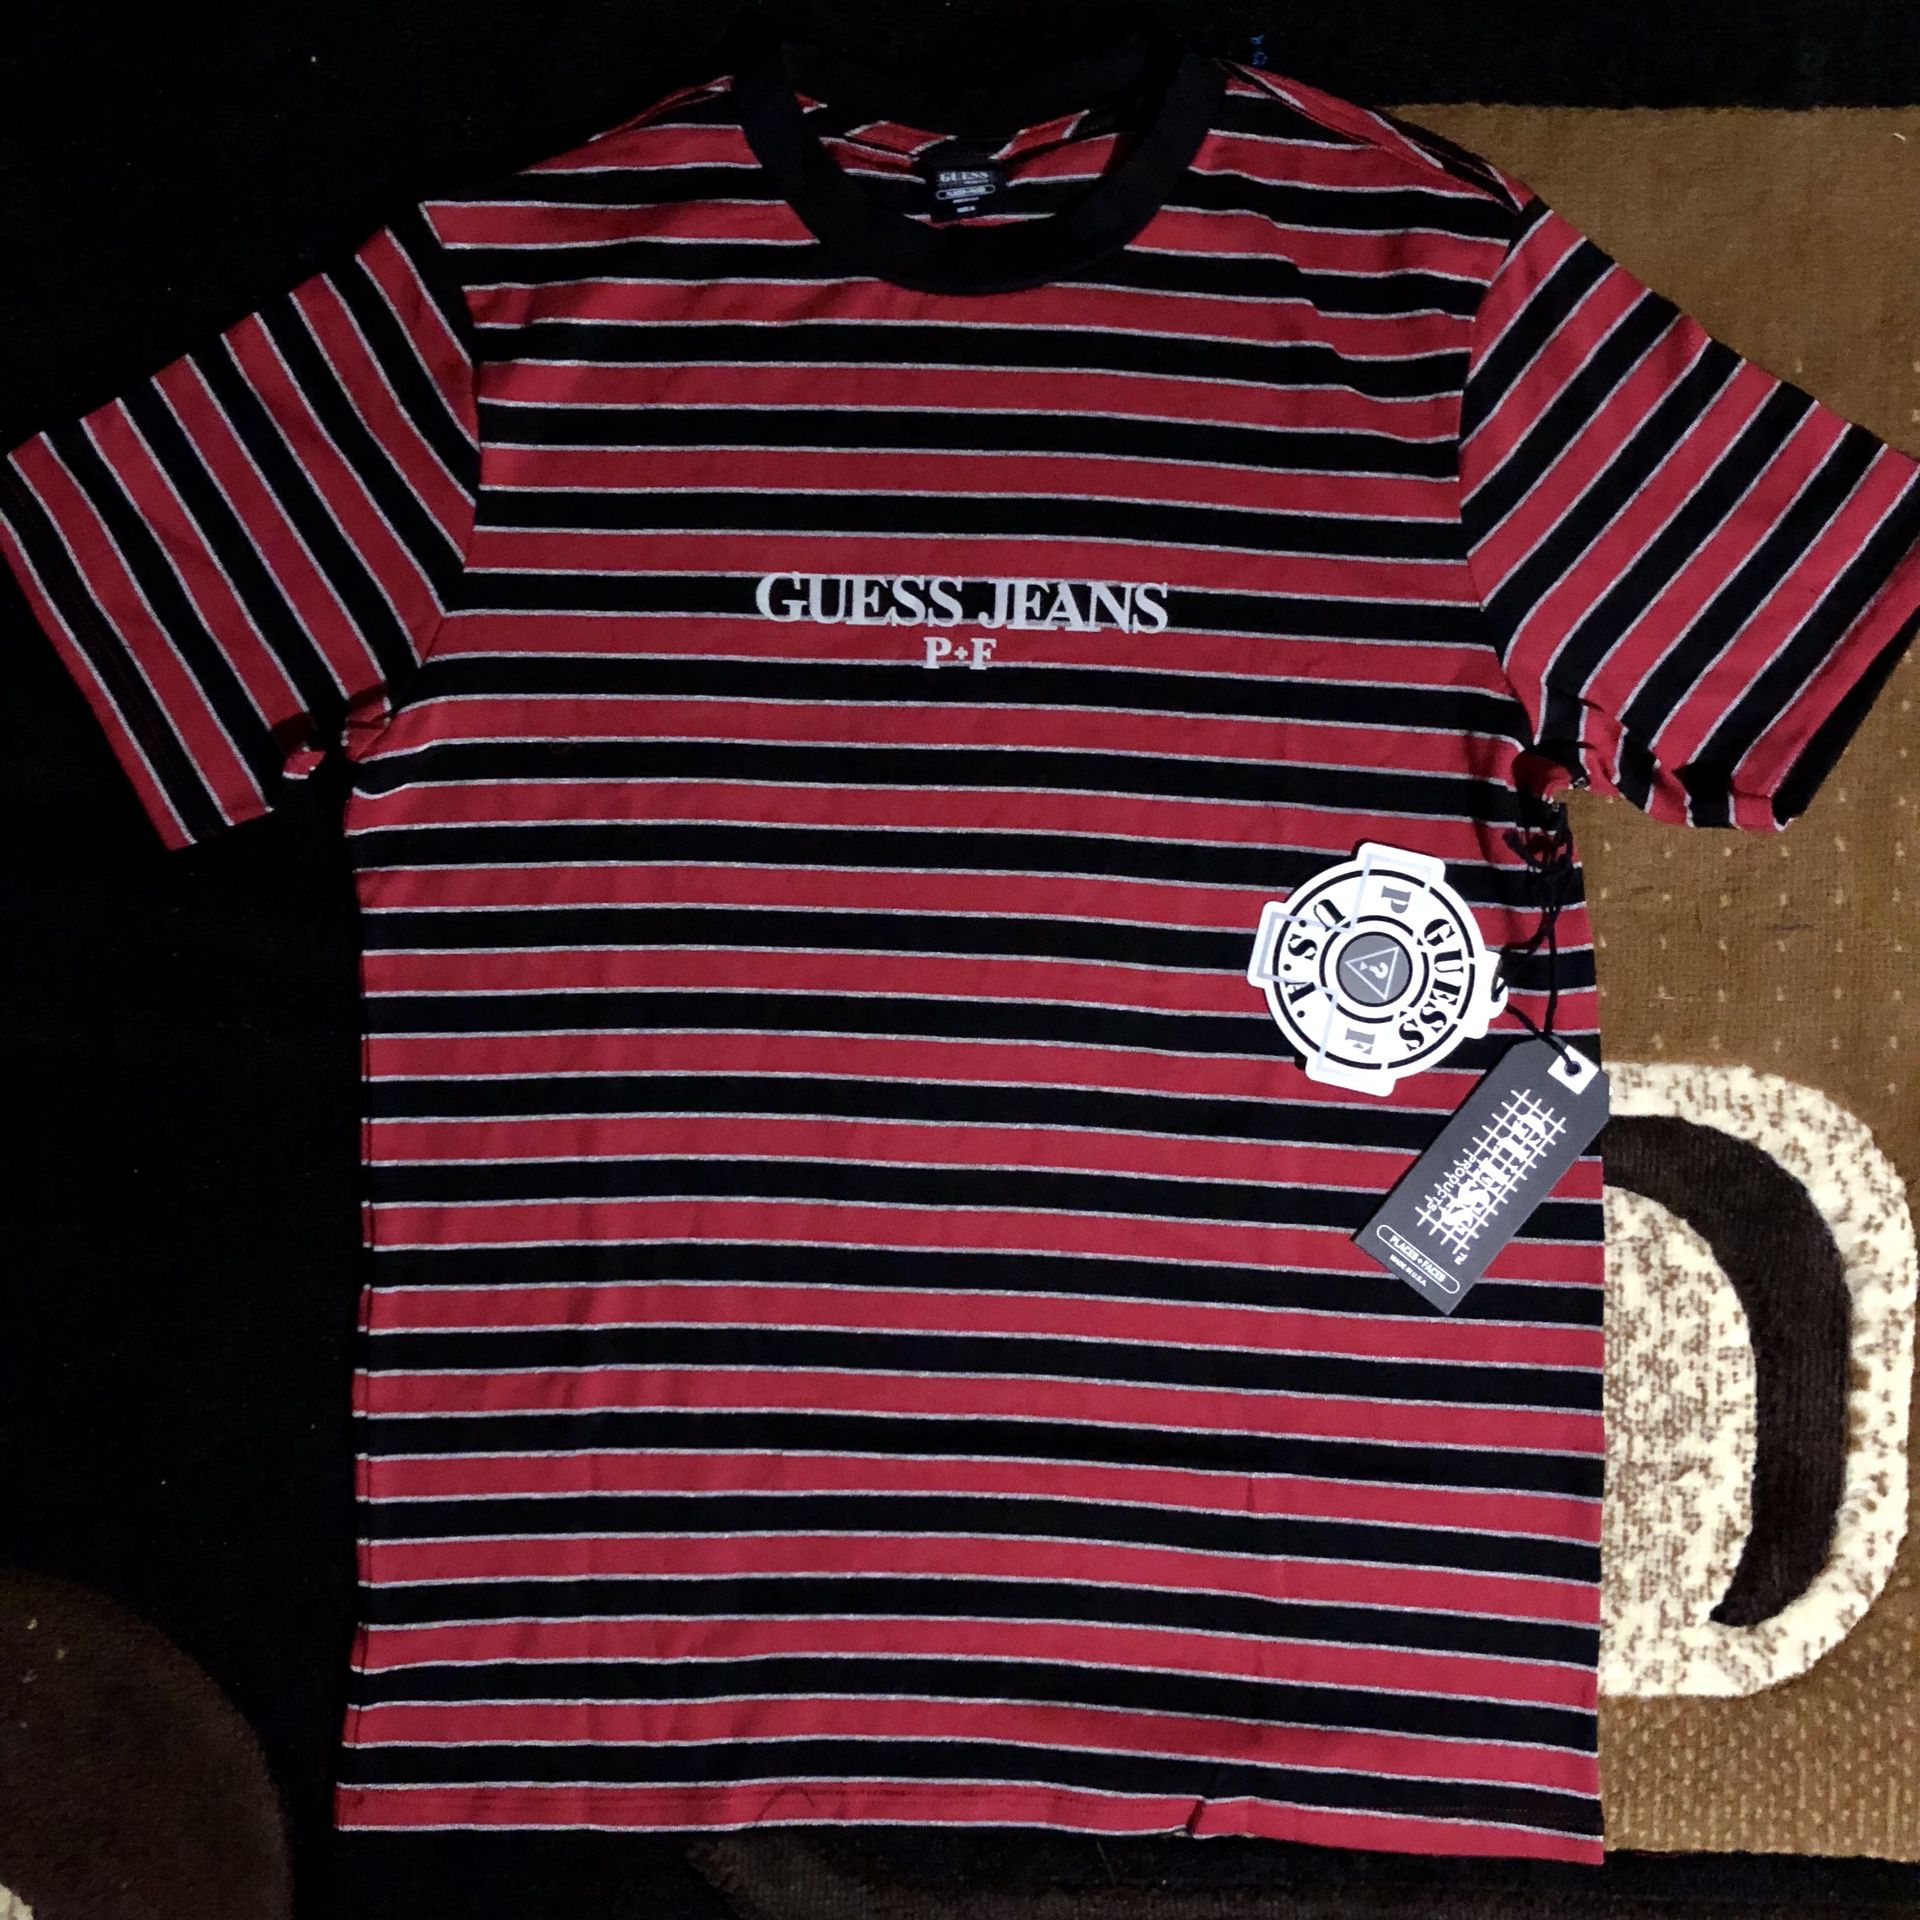 Guess x + Faces Complexcon Short tee for Sale in Tustin, CA - OfferUp